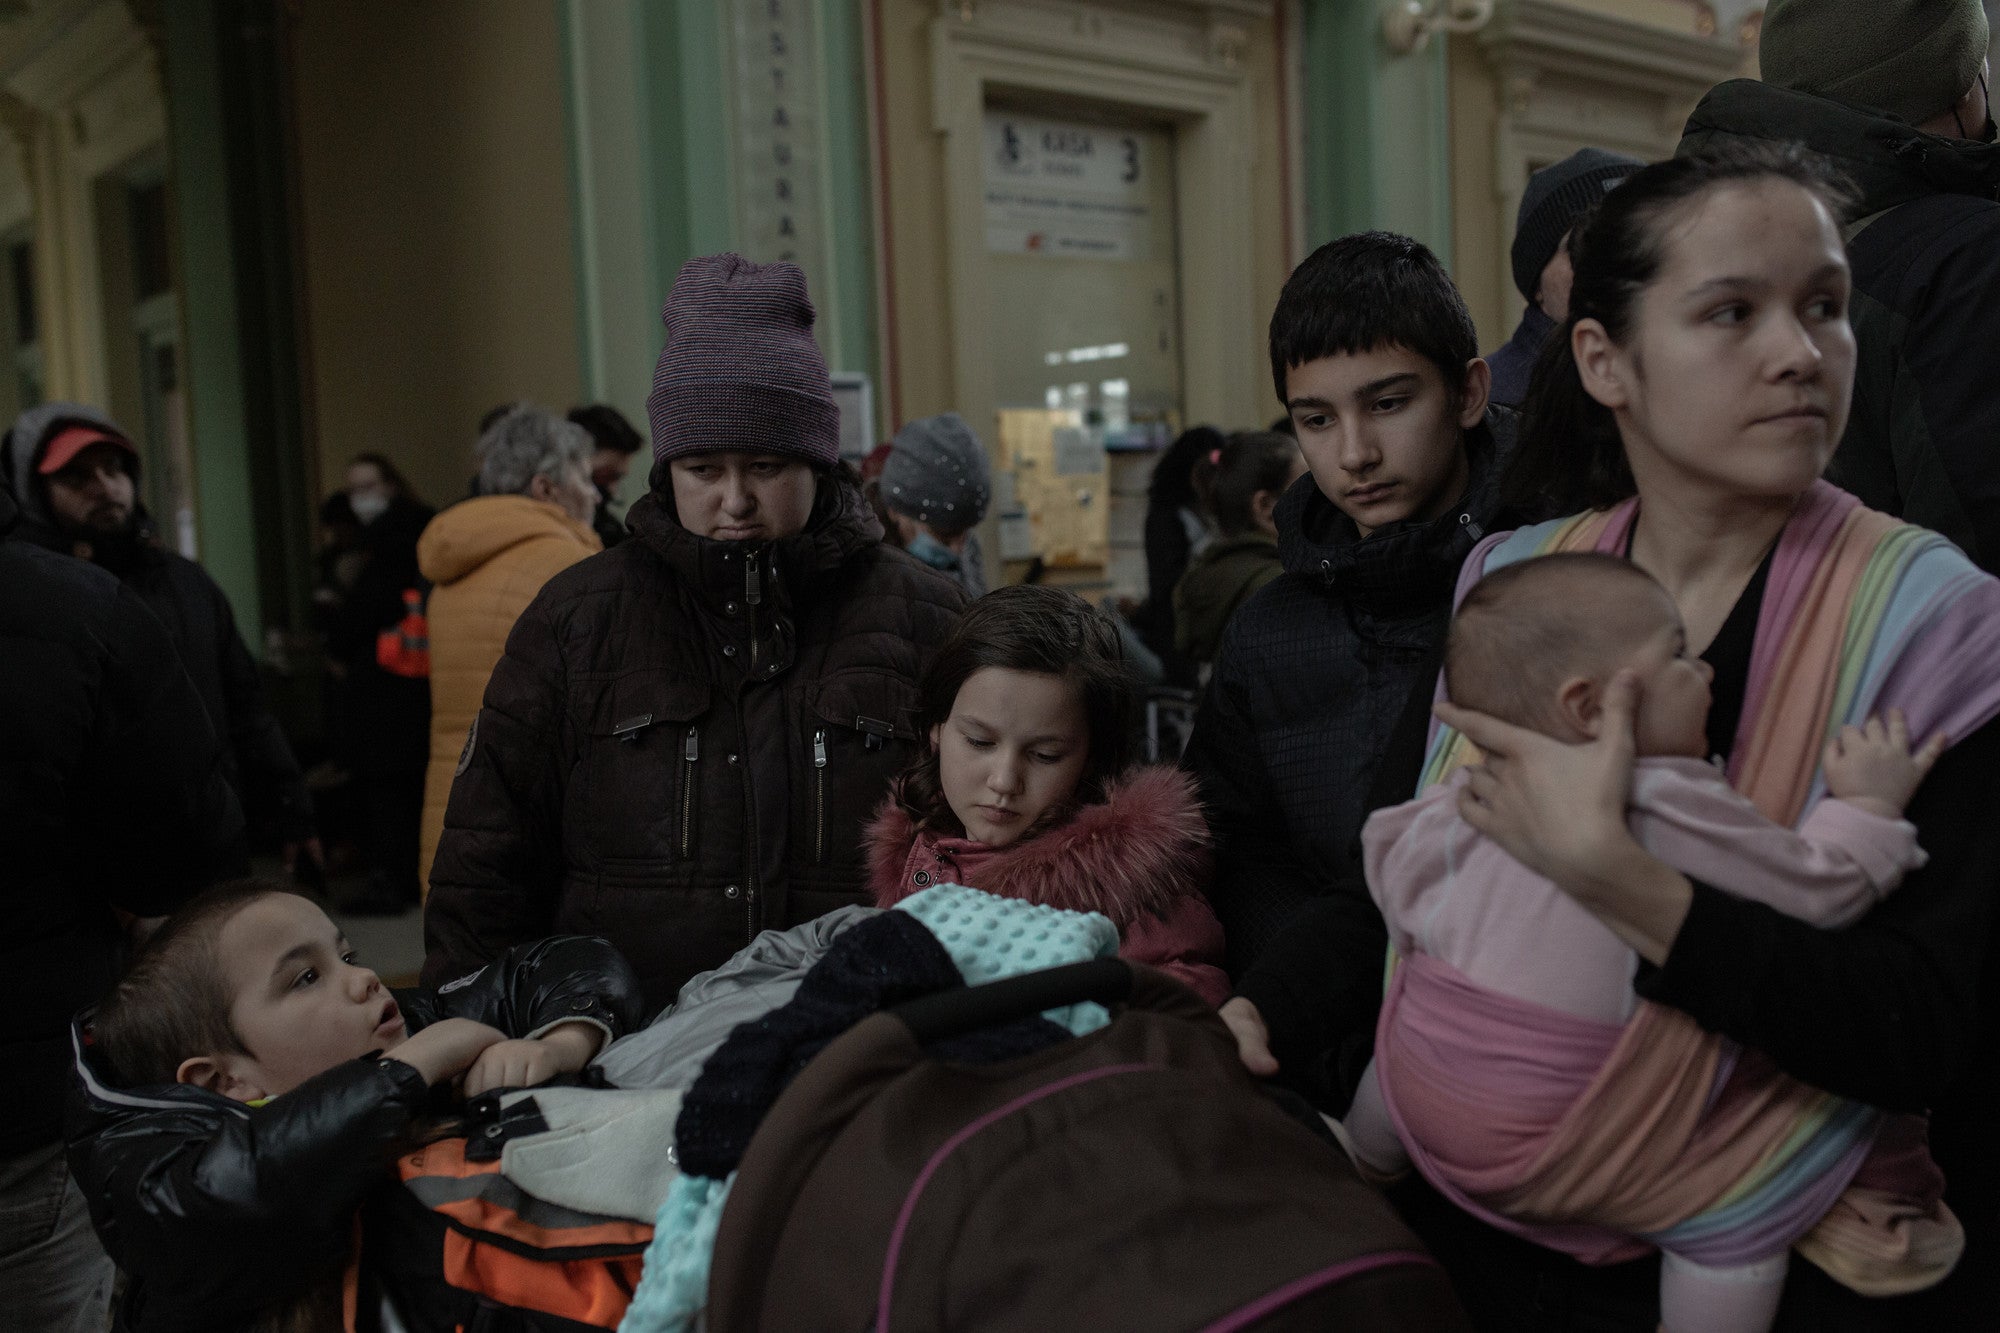 Ukrainian refugees, including many children and women, arrive by trains at Przemyl station (Poland).